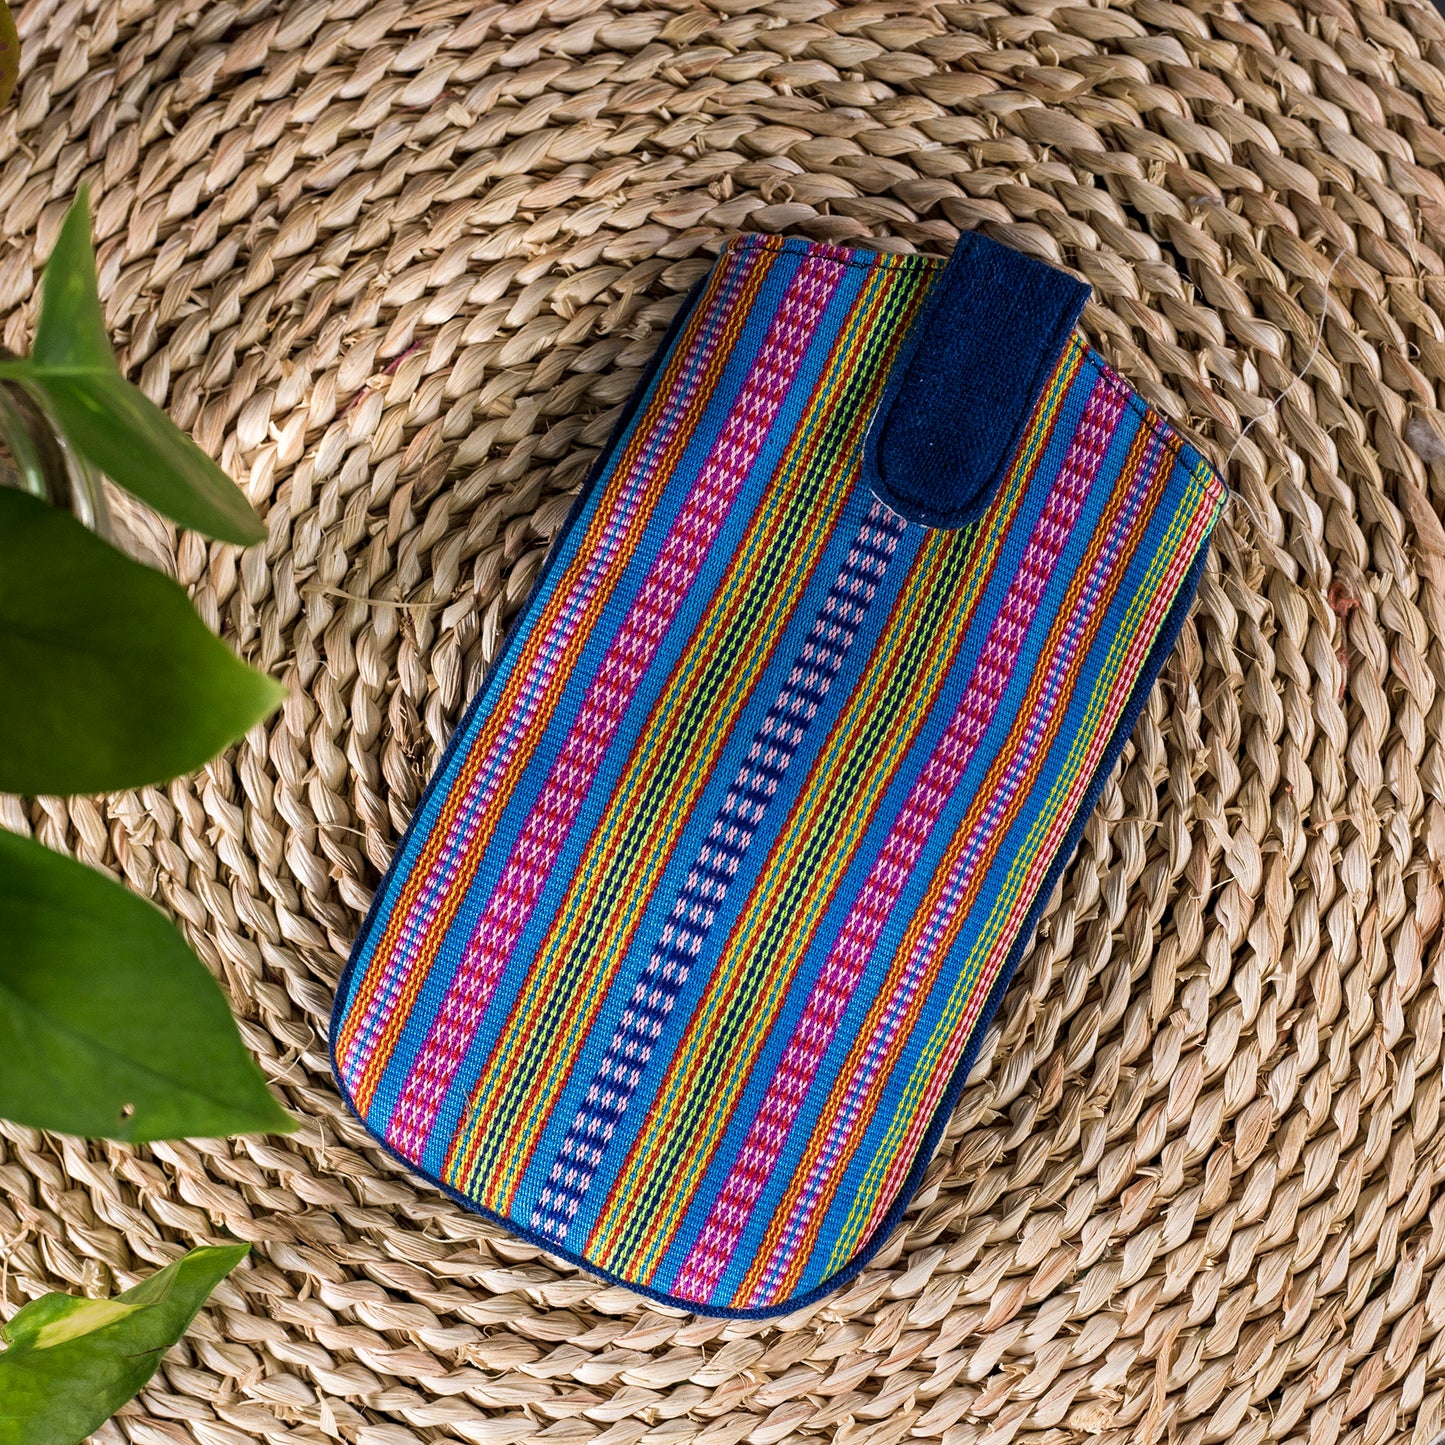 Phone case / glass case in hand-woven tribal fabrics, light absorption layer